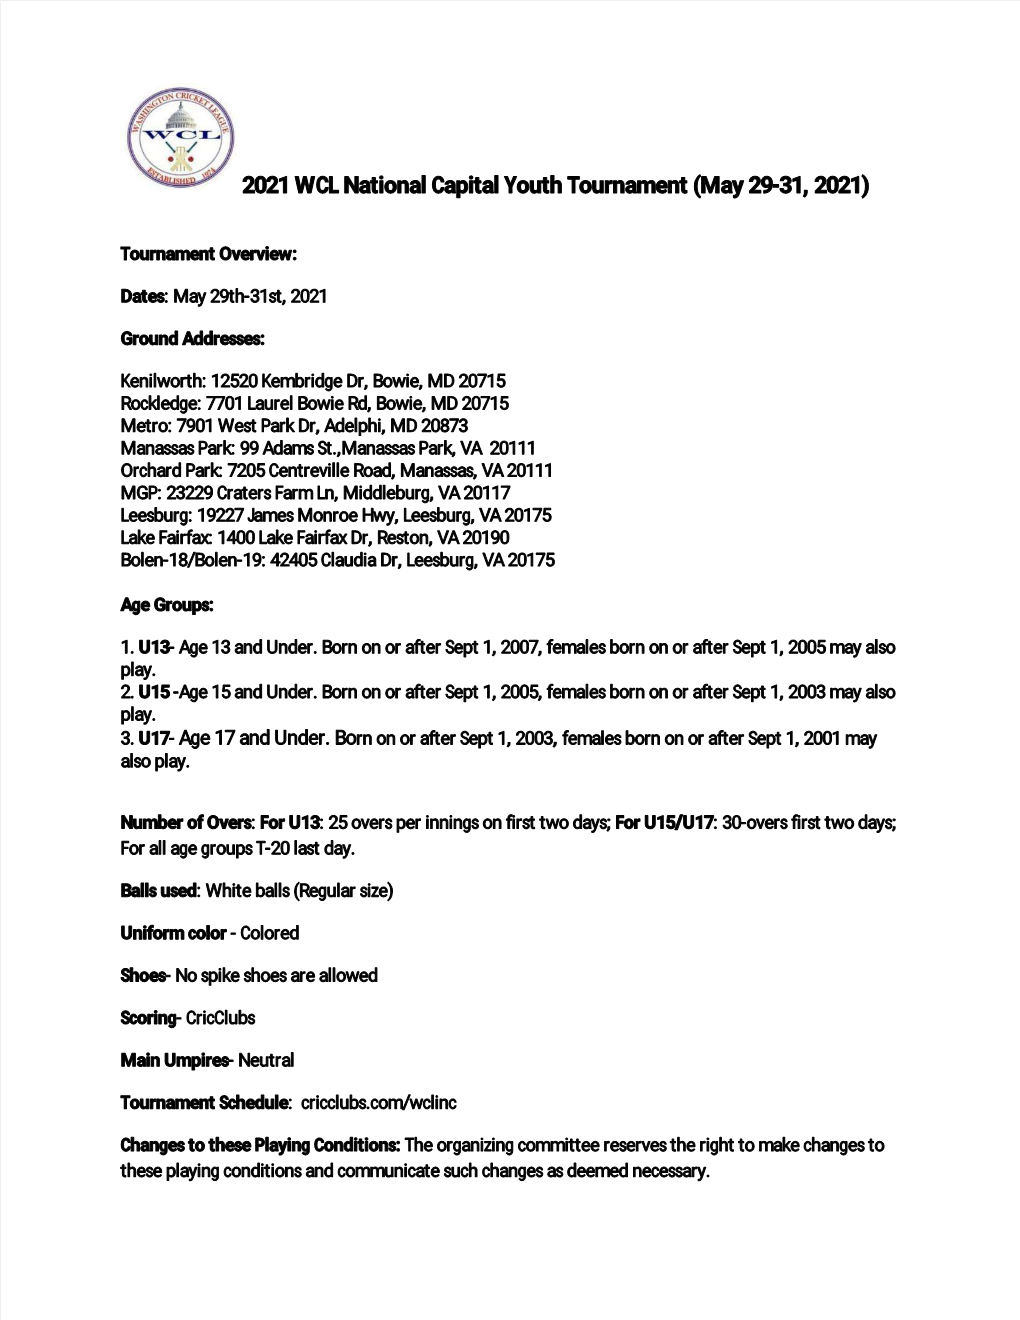 WCL National Capital Youth Tournament 2021